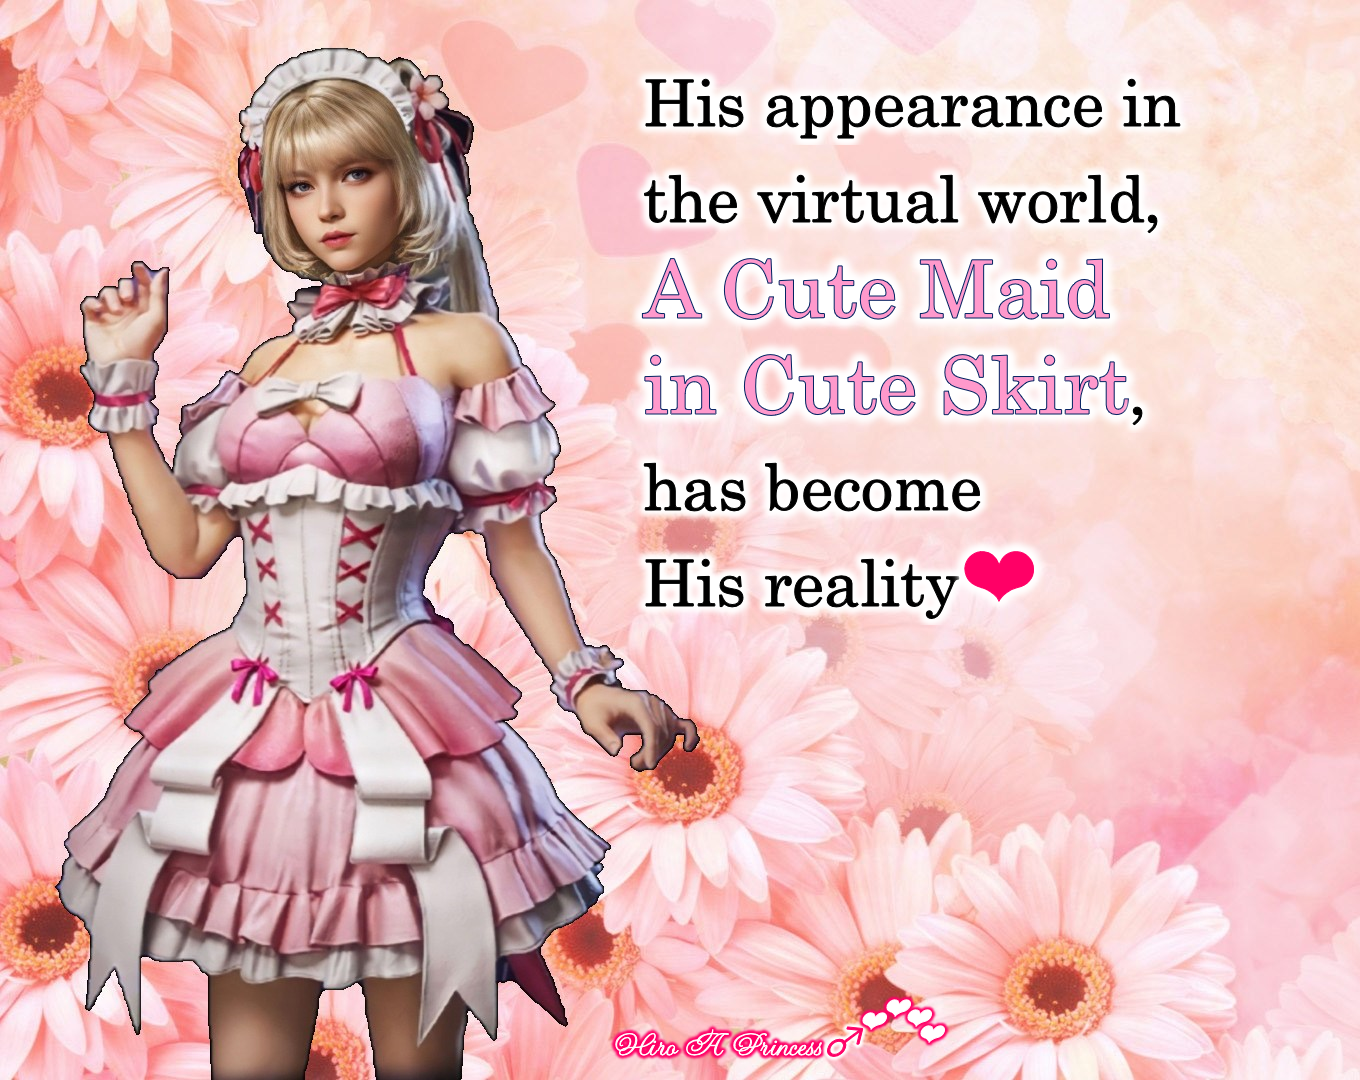 His appearance in the virtual world, a Cute Maid in Cute Skirt, has become his reality E